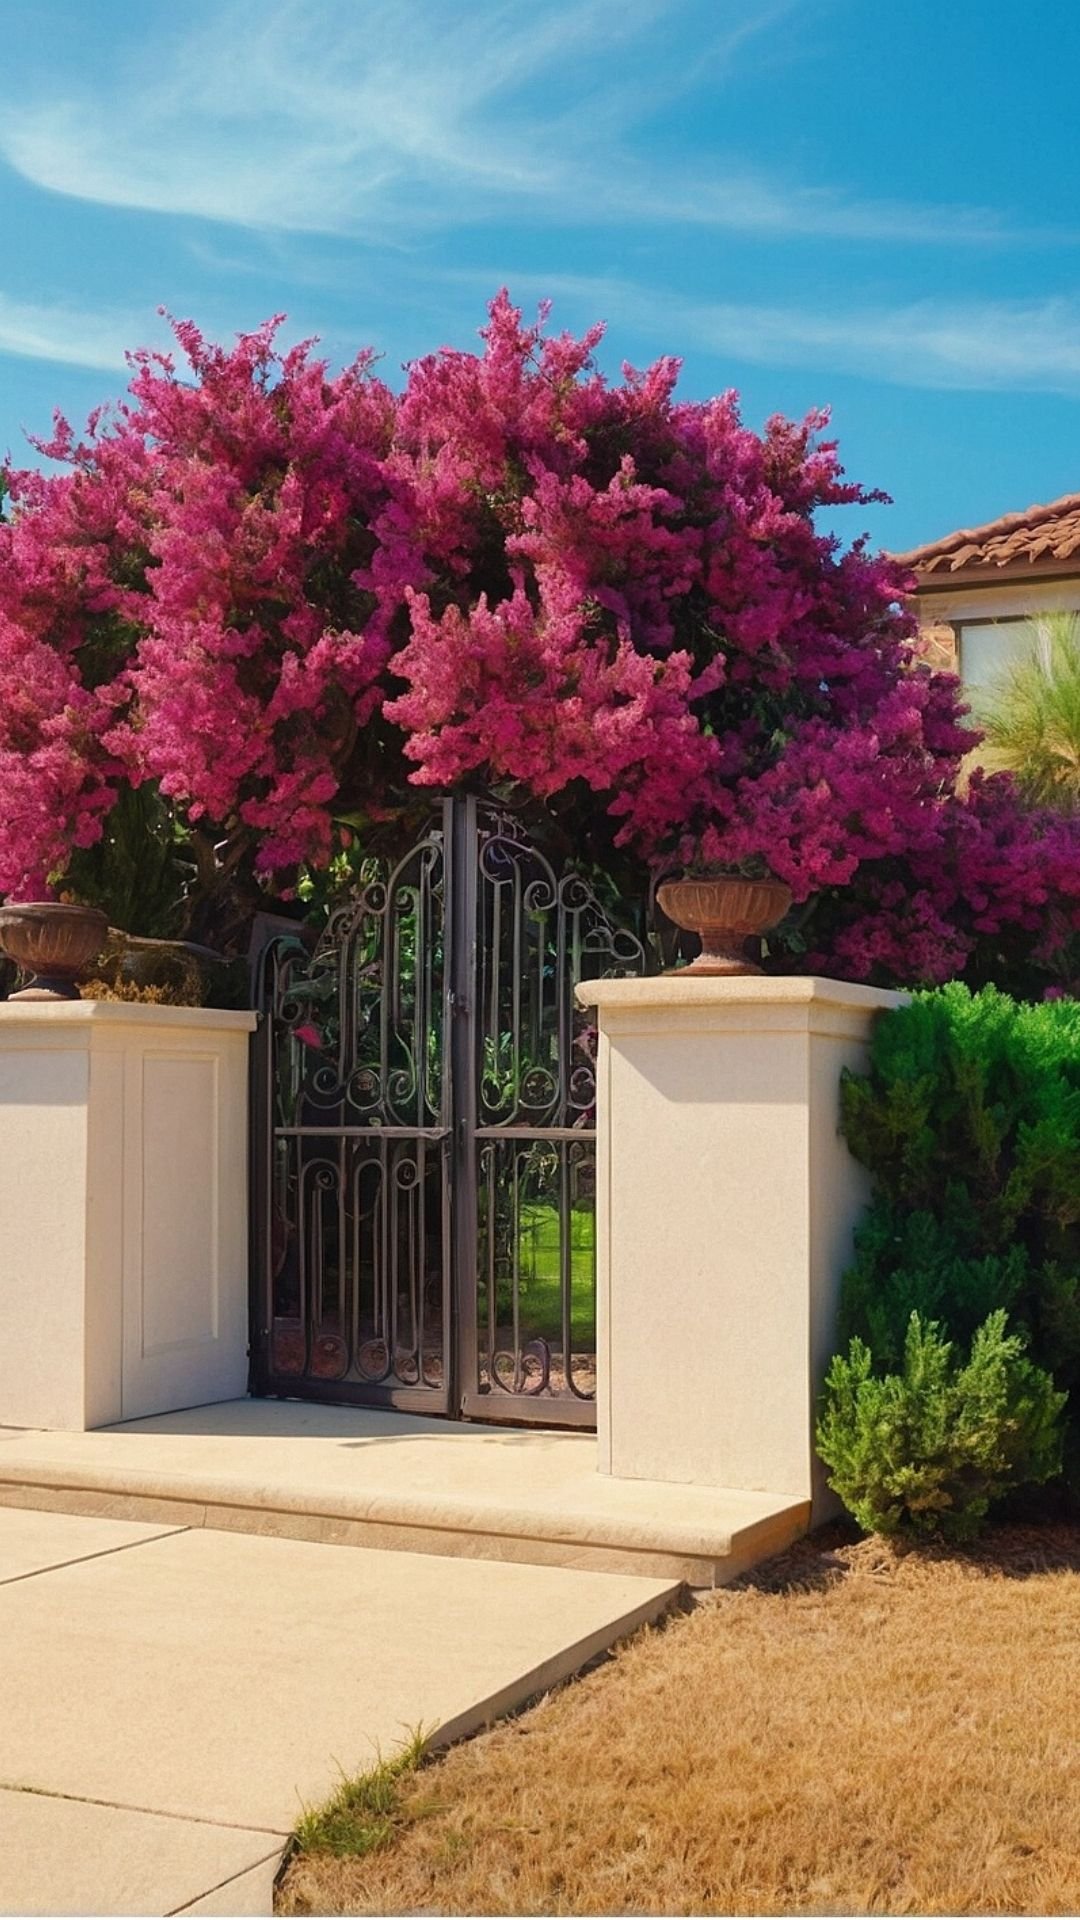 Bougainvillea Majesty at the Gates